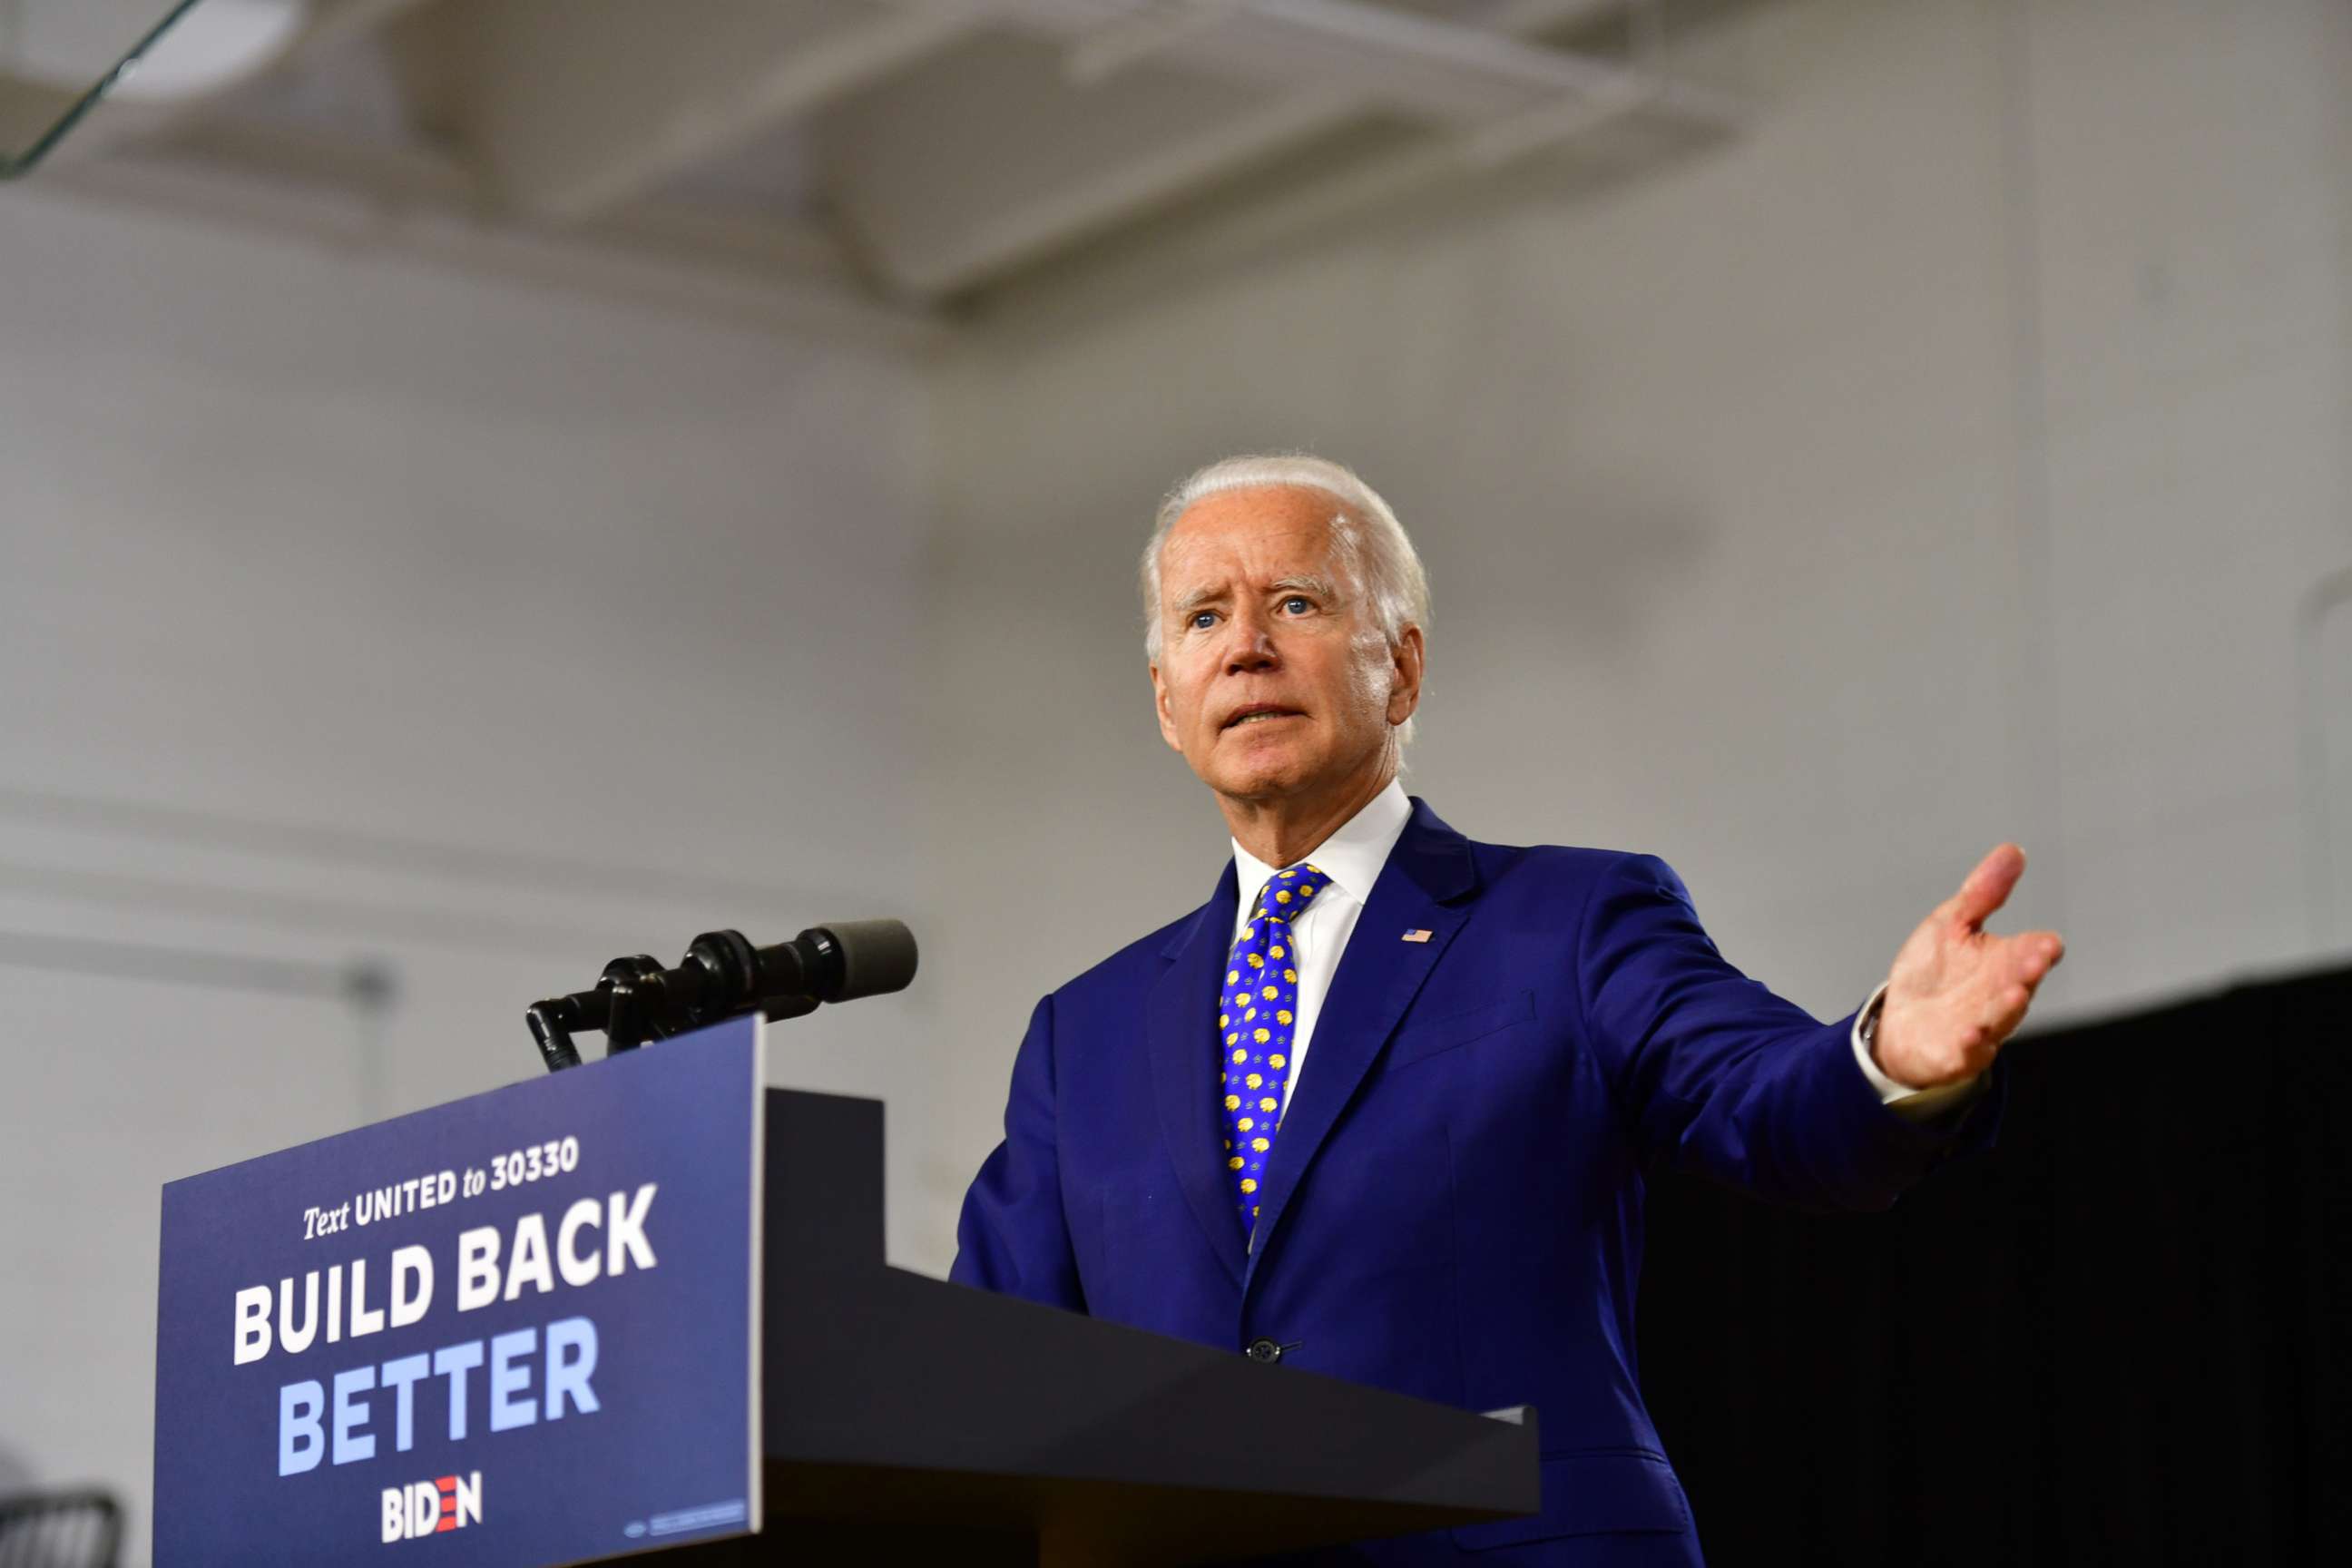 PHOTO: Democratic presidential candidate and former Vice President Joe Biden delivers a speech at the William Hicks Anderson Community Center in Wilmington, Del., July 28, 2020.